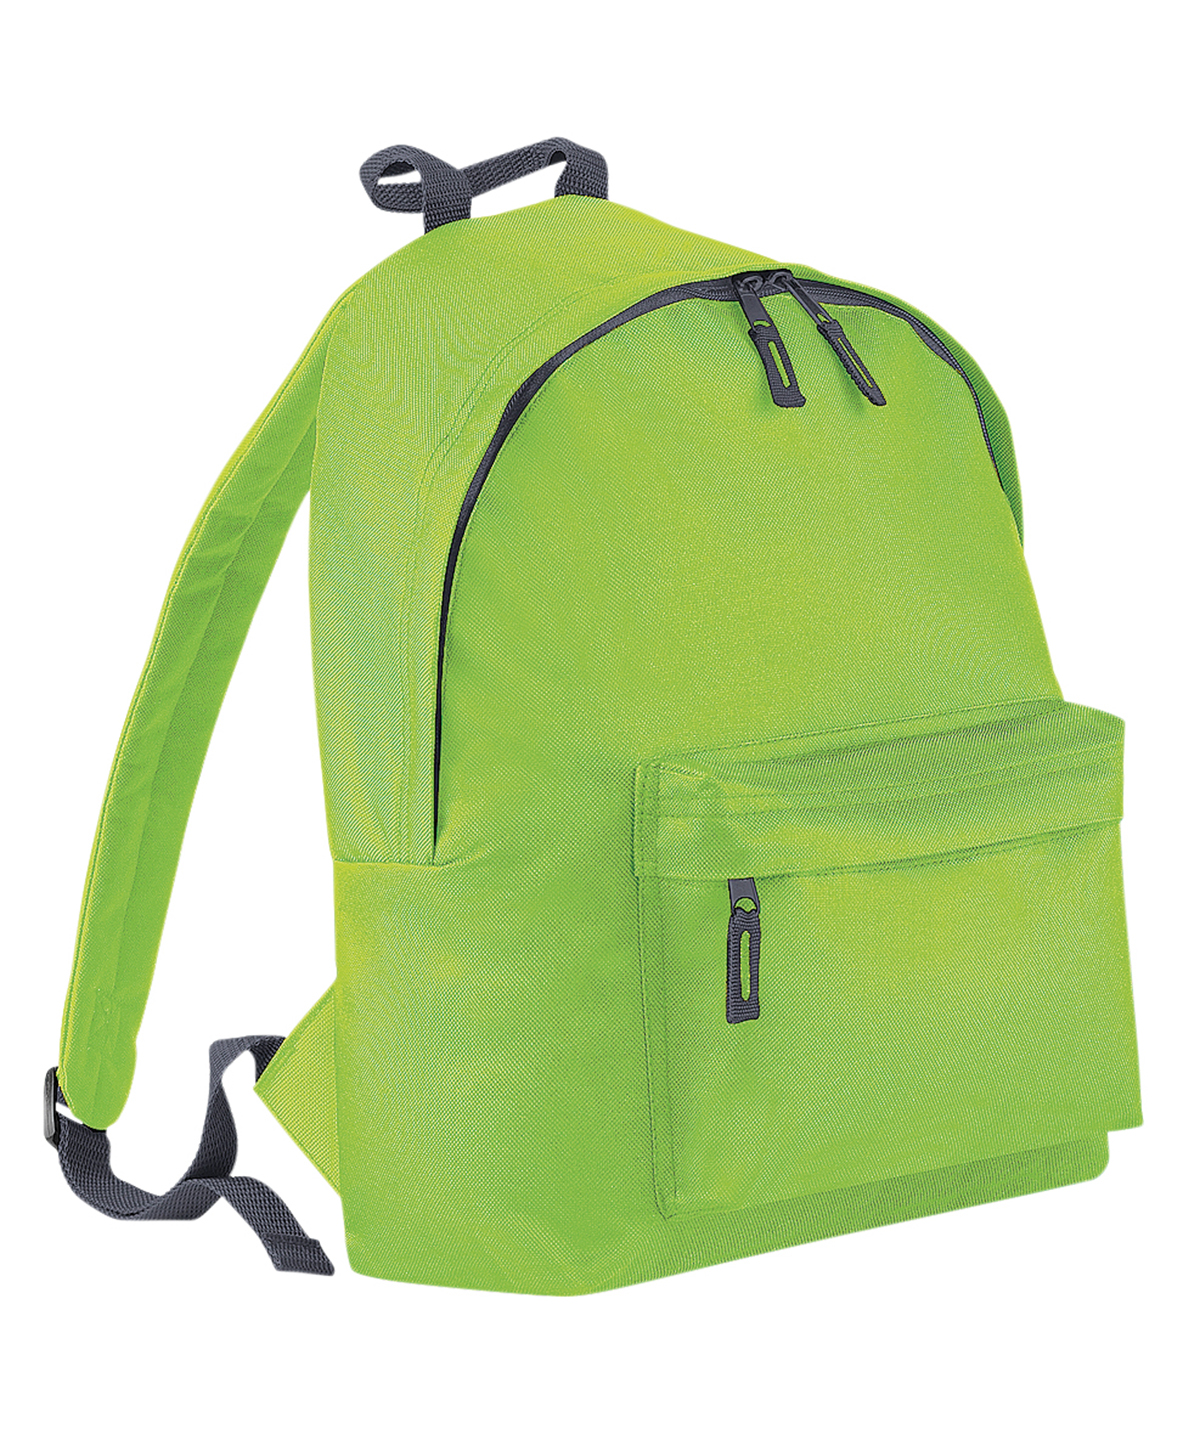 Junior Fashion Backpack Lime Green/Graphite grey Size One Size